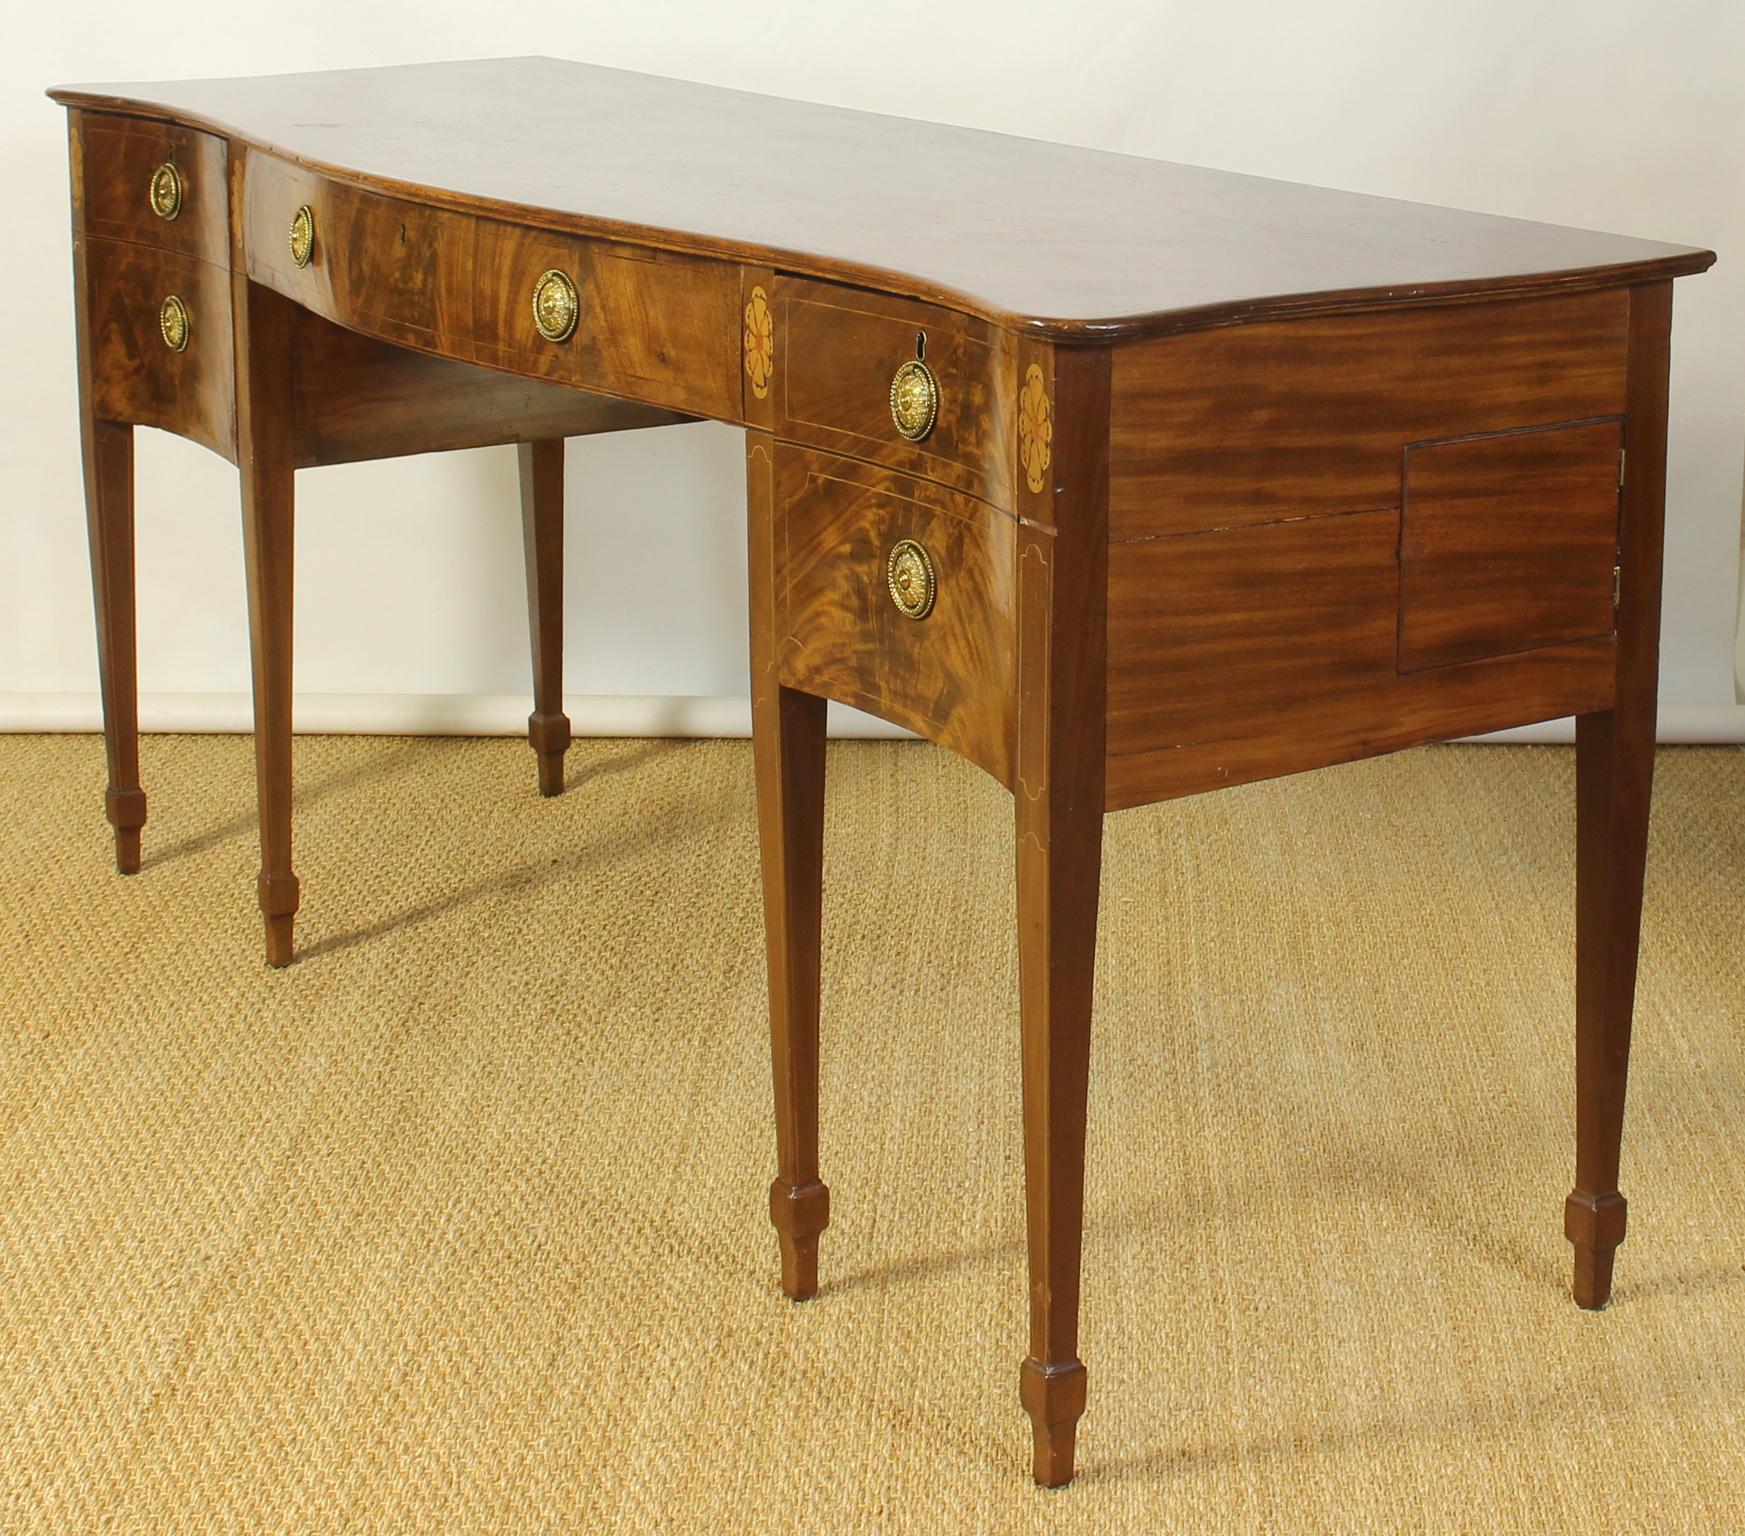 An exceptionally long and elegantly proportioned late 18th century. English serpentine front Geo. III mahogany sideboard with one centre drawer and two flanking cabinets accented with original gilt brass pulls.